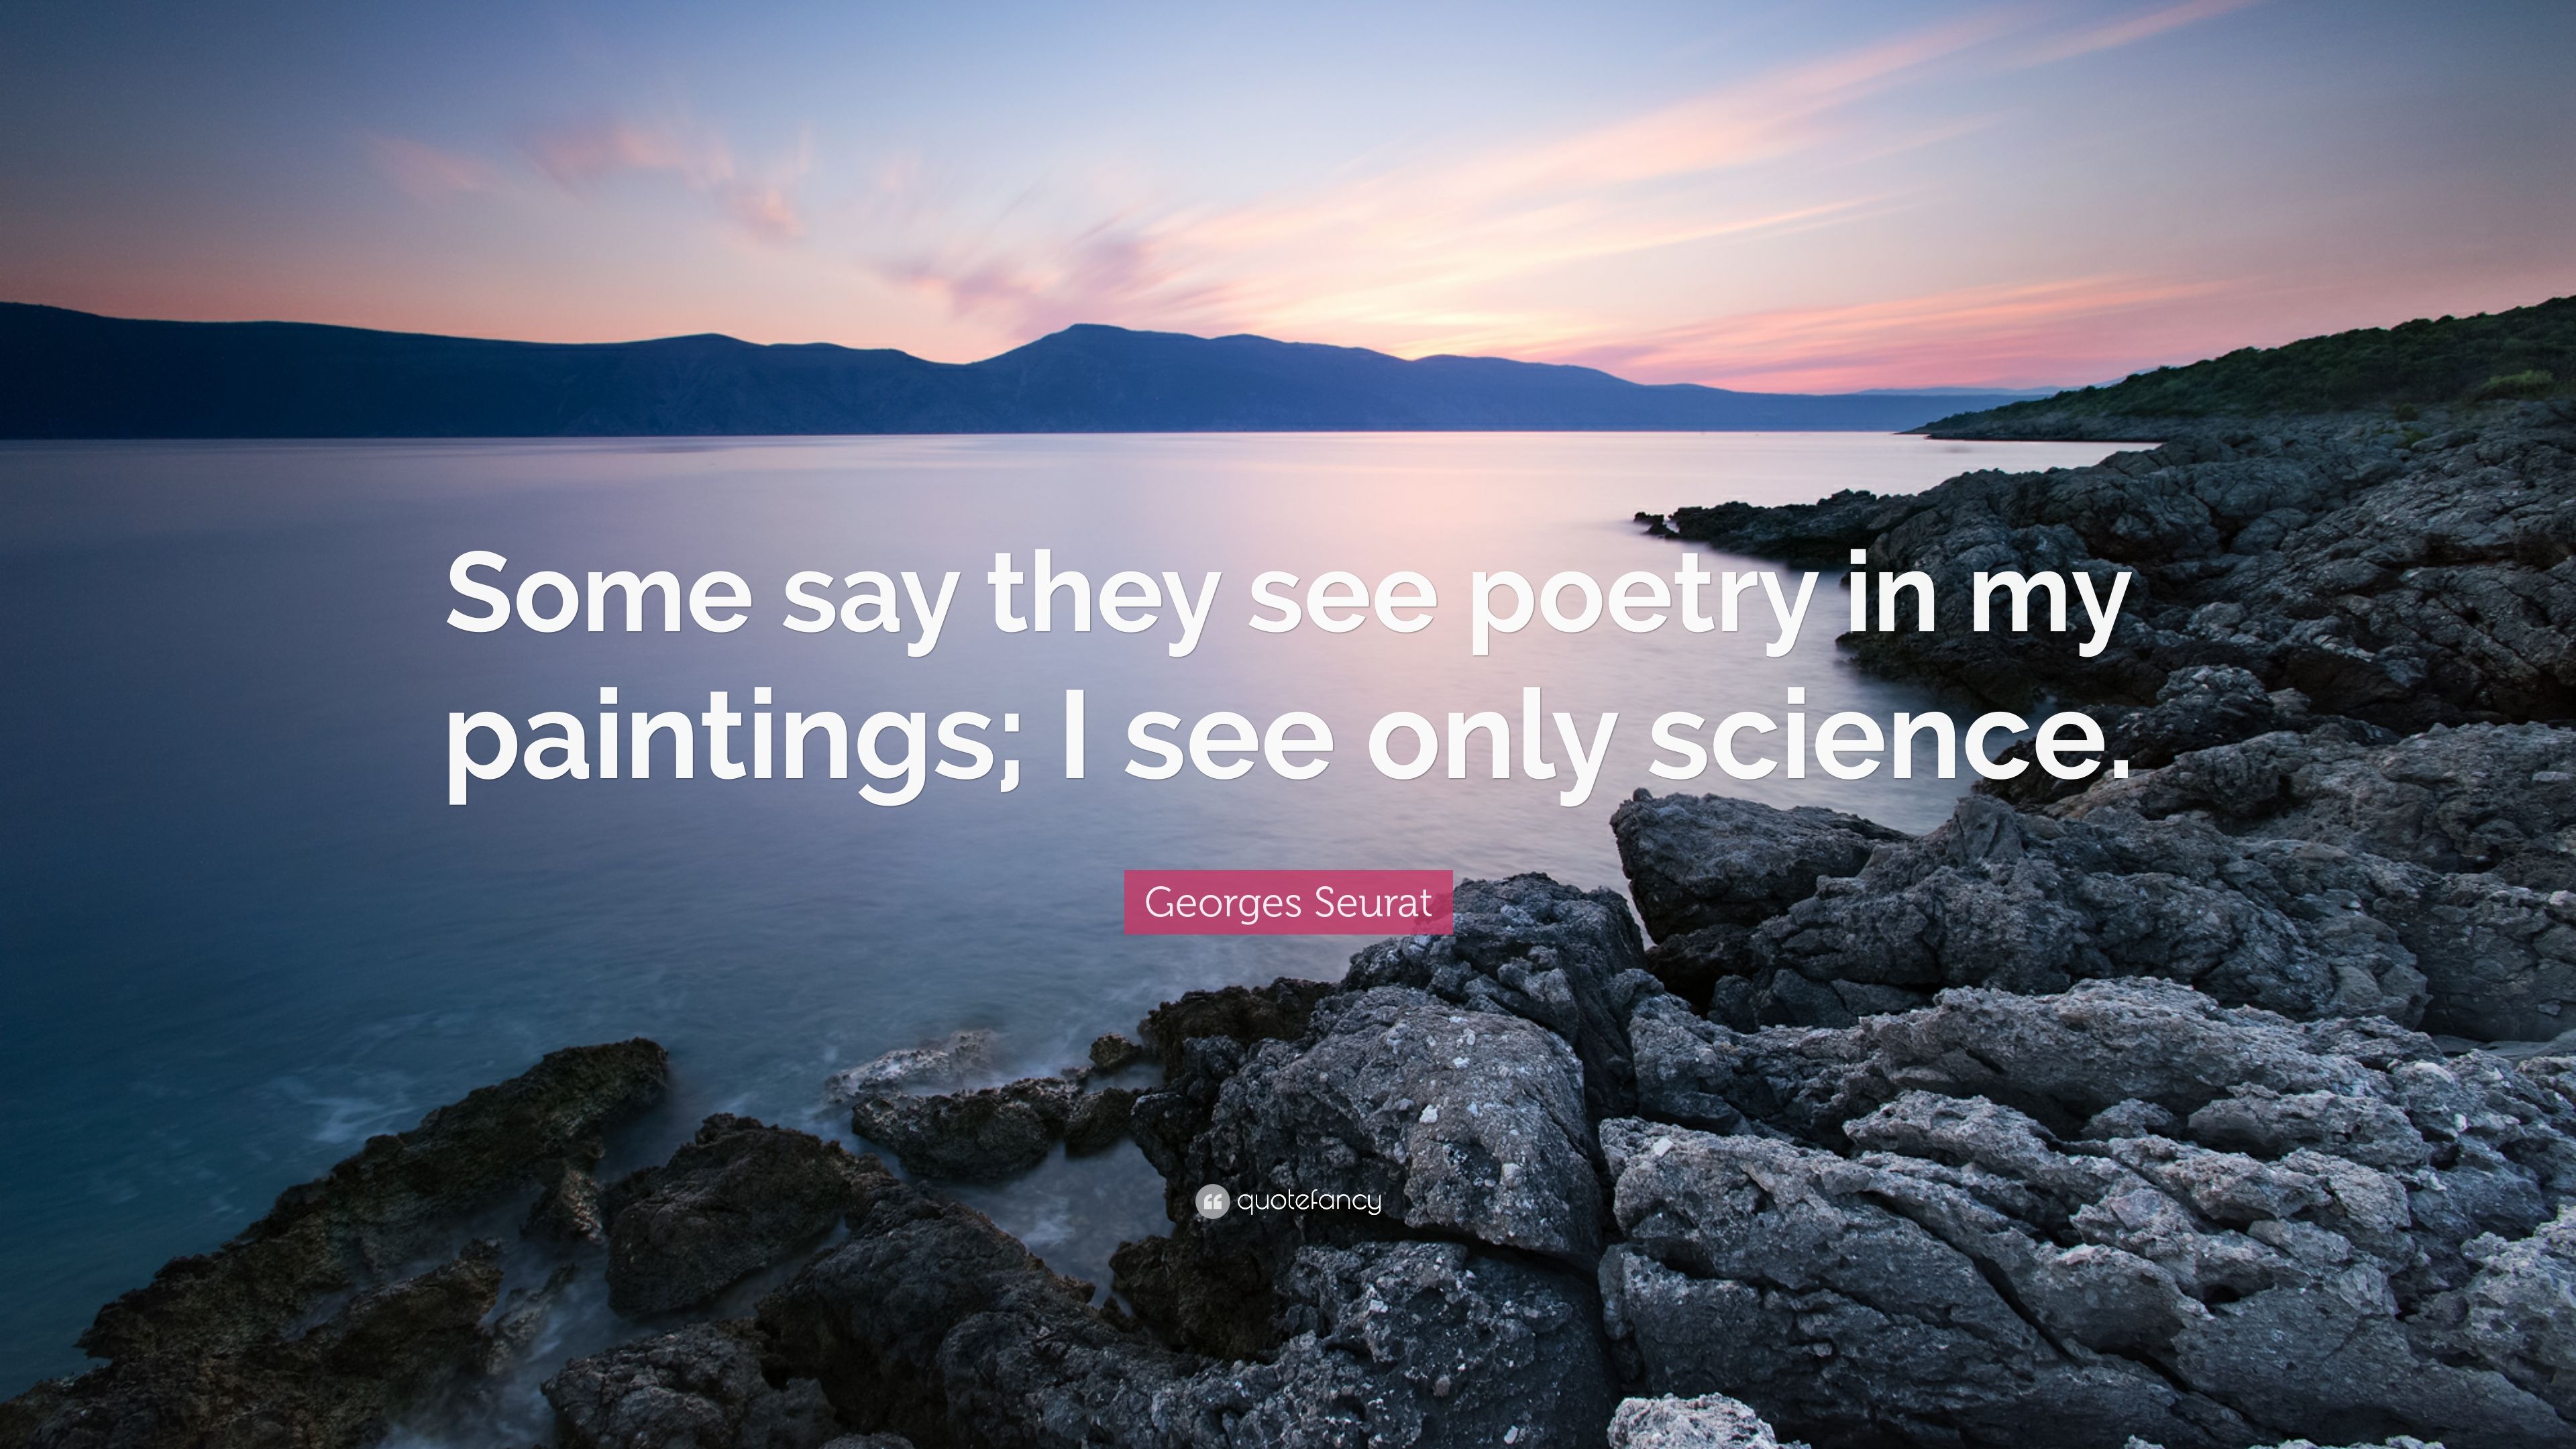 Georges Seurat Quotes (6 wallpaper)